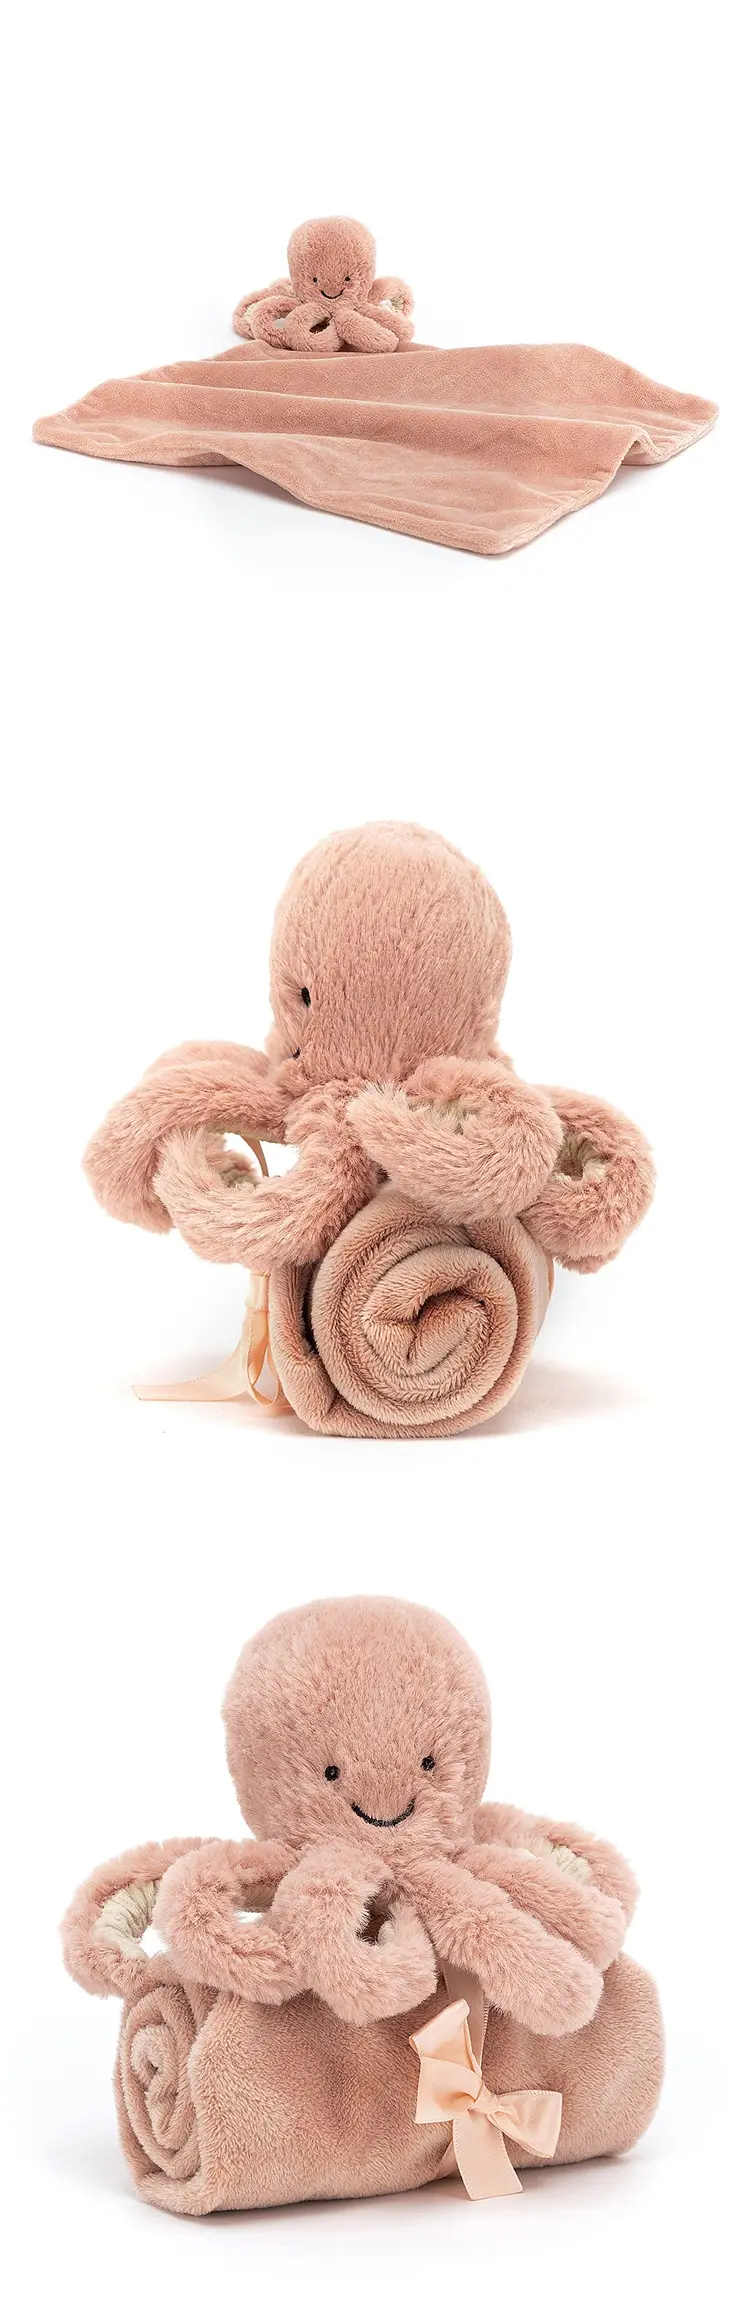 JellyCat Odell Octopus Soother 八爪魚安撫巾